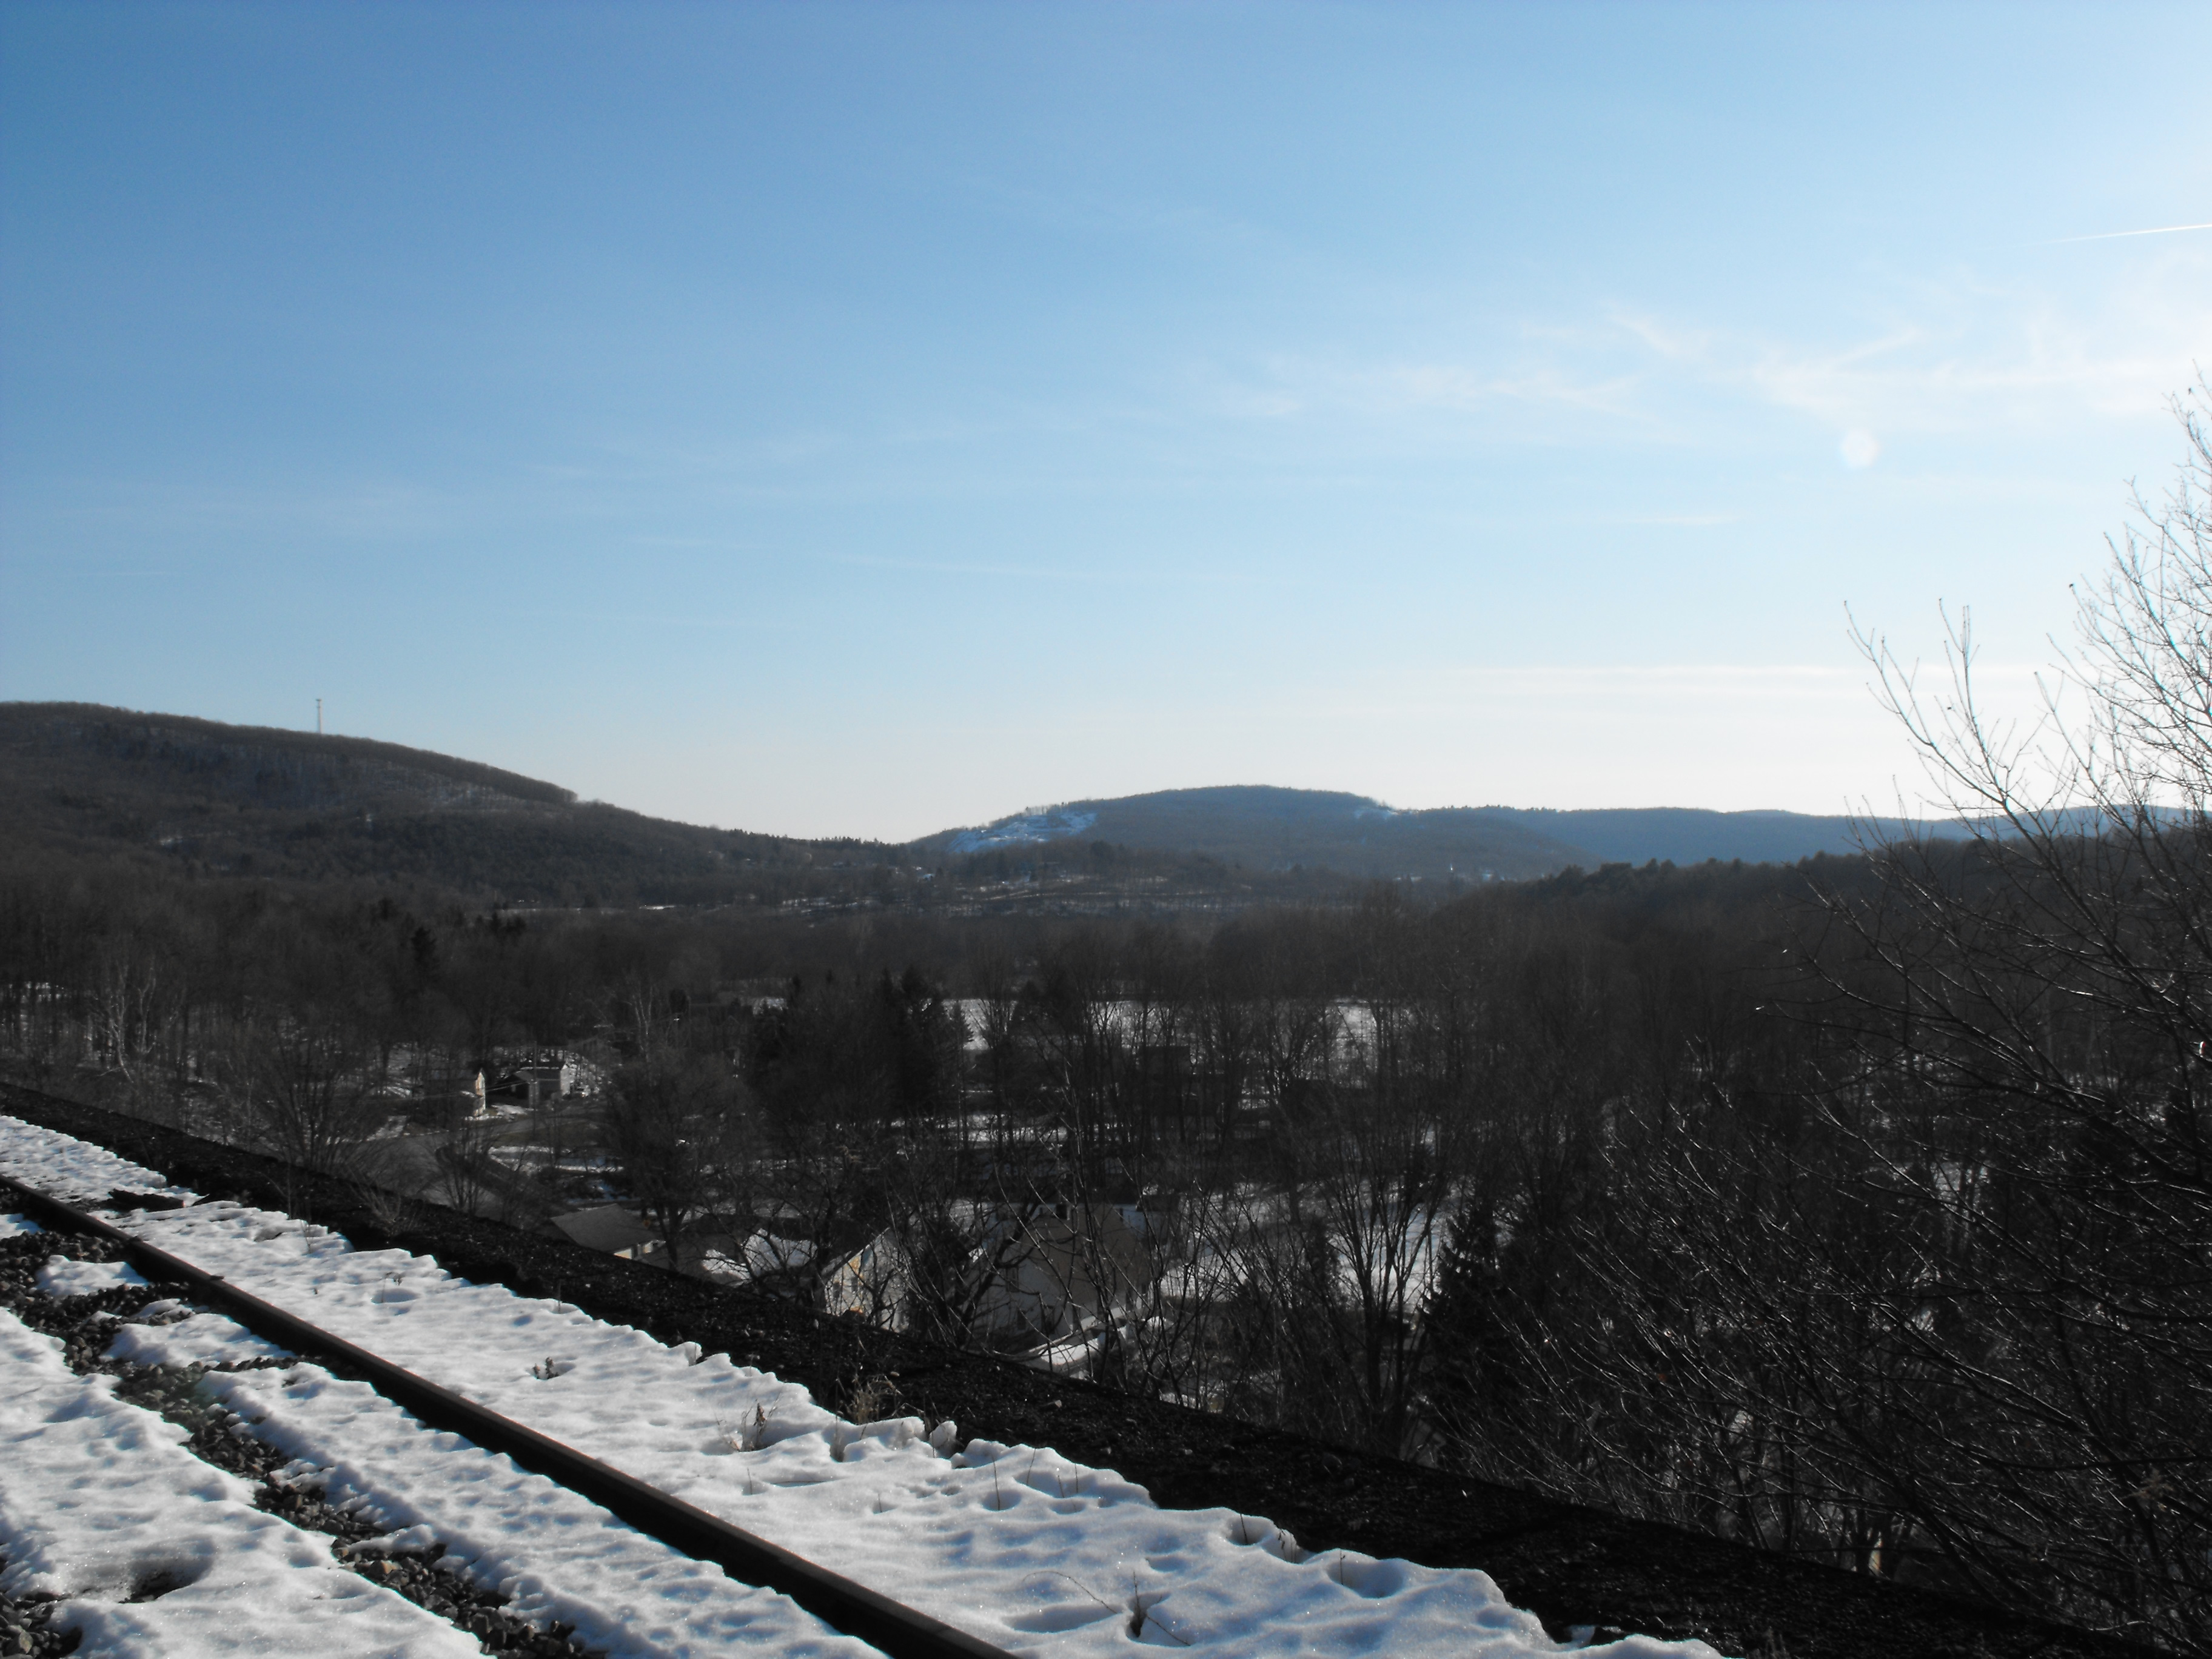 View from atop the Starrucca Viaduct